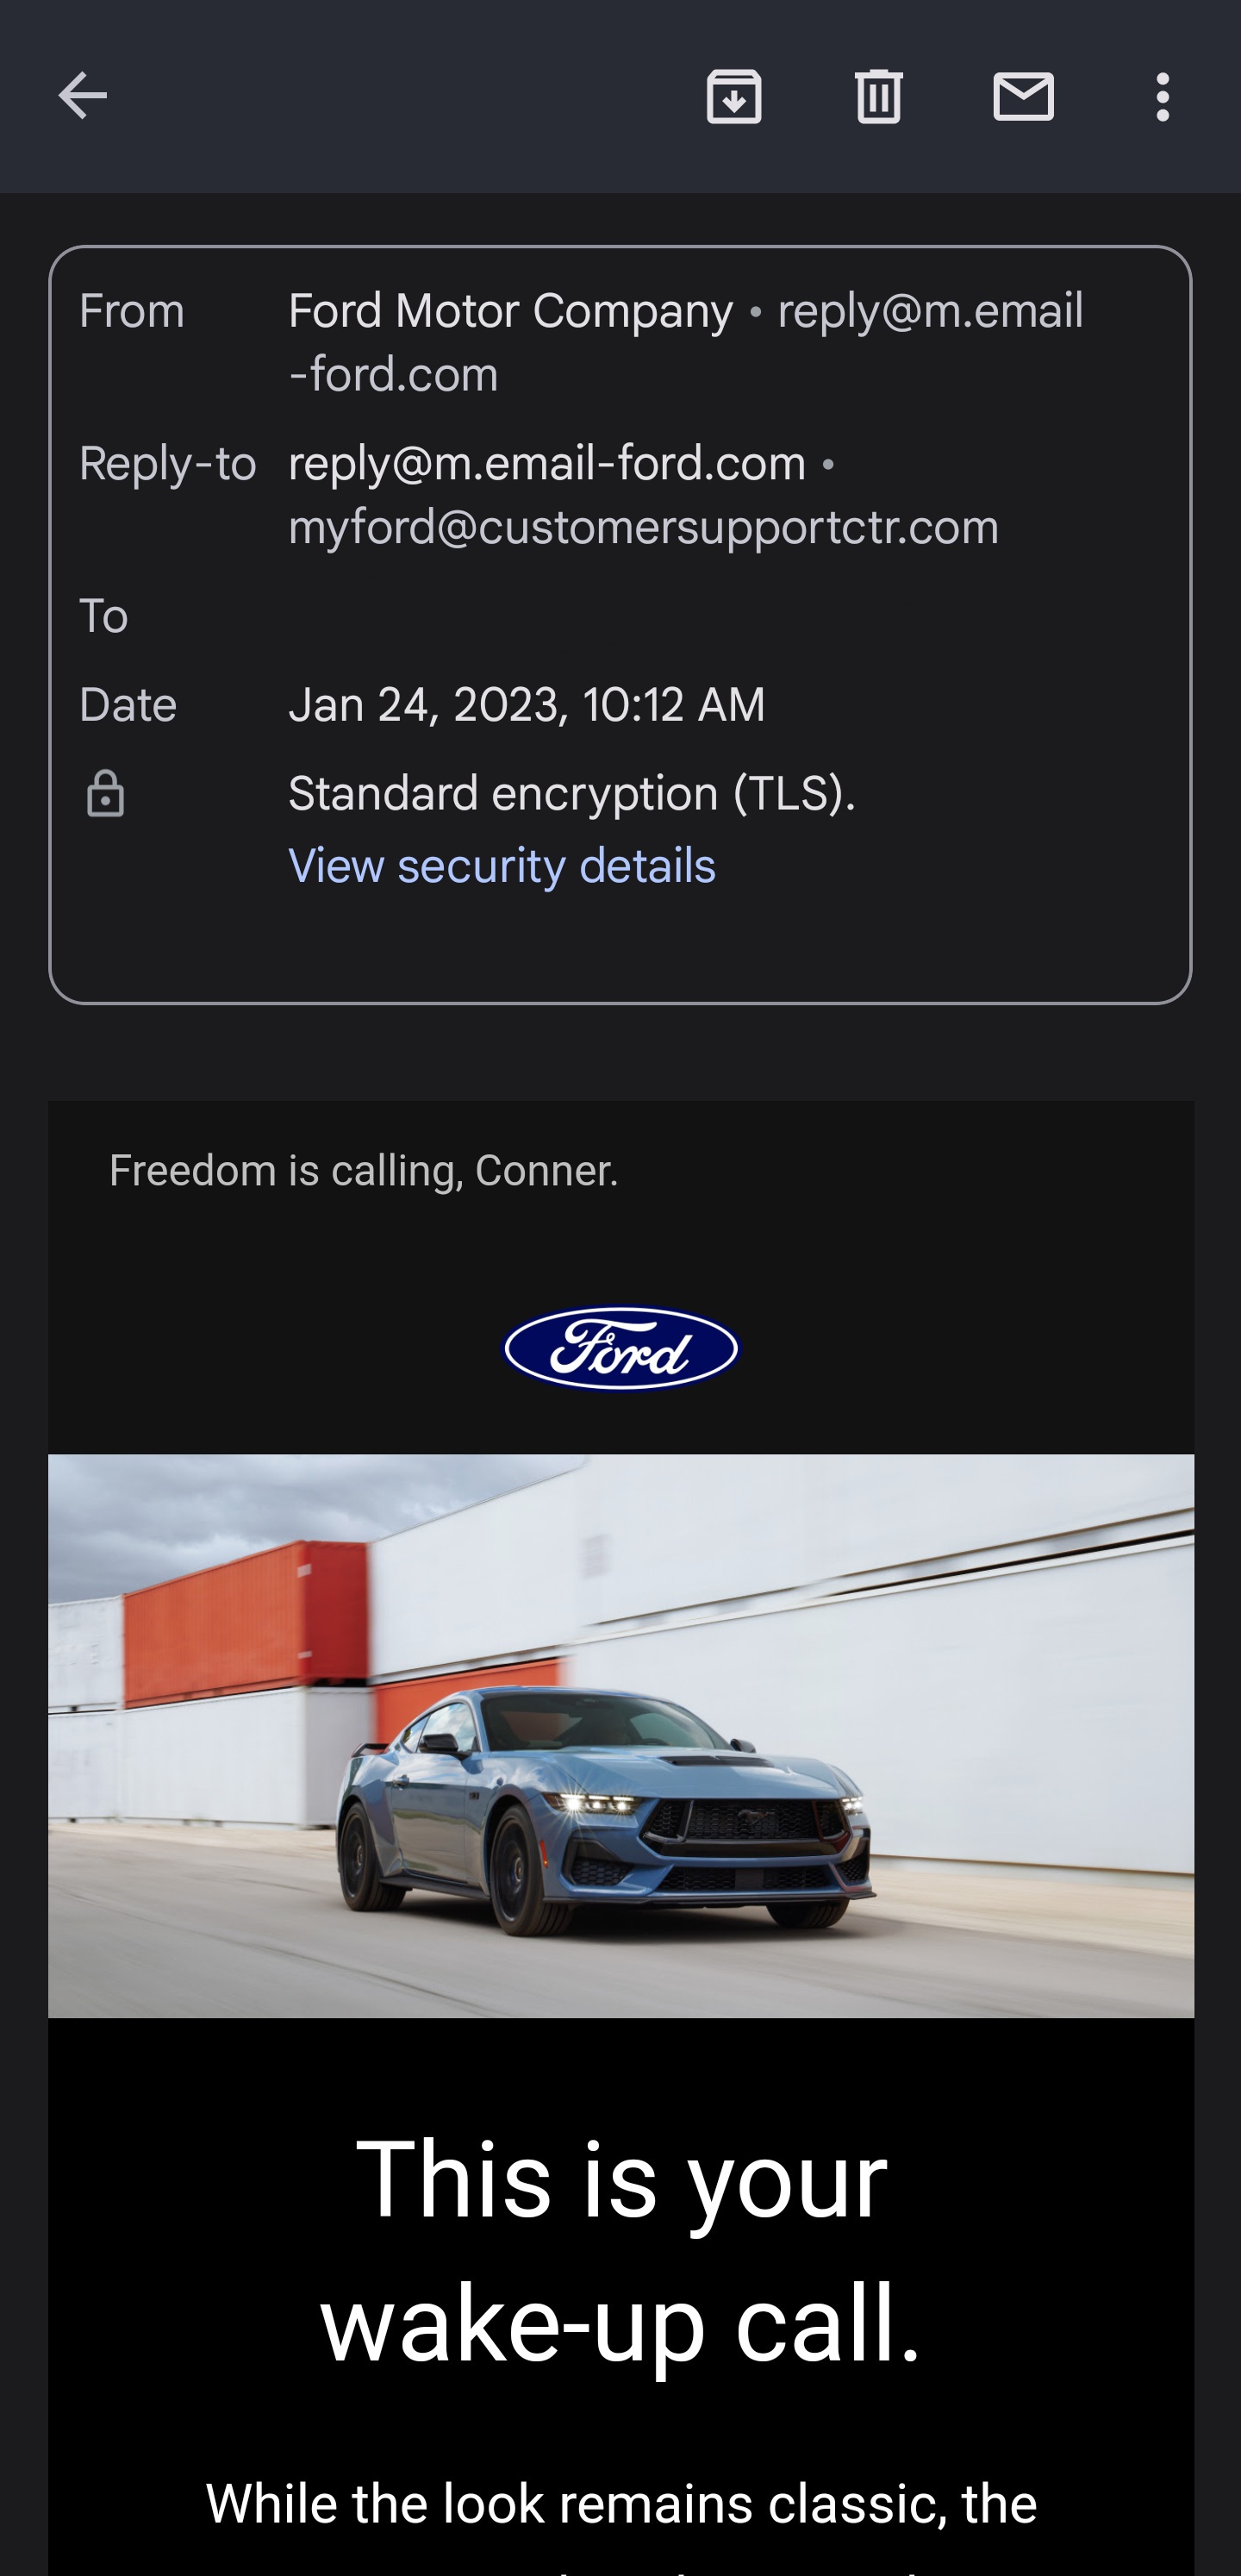 S650 Mustang "This Is Your Wake-up Call" Email Received This Morning Screenshot_20230125_041718_Gmail